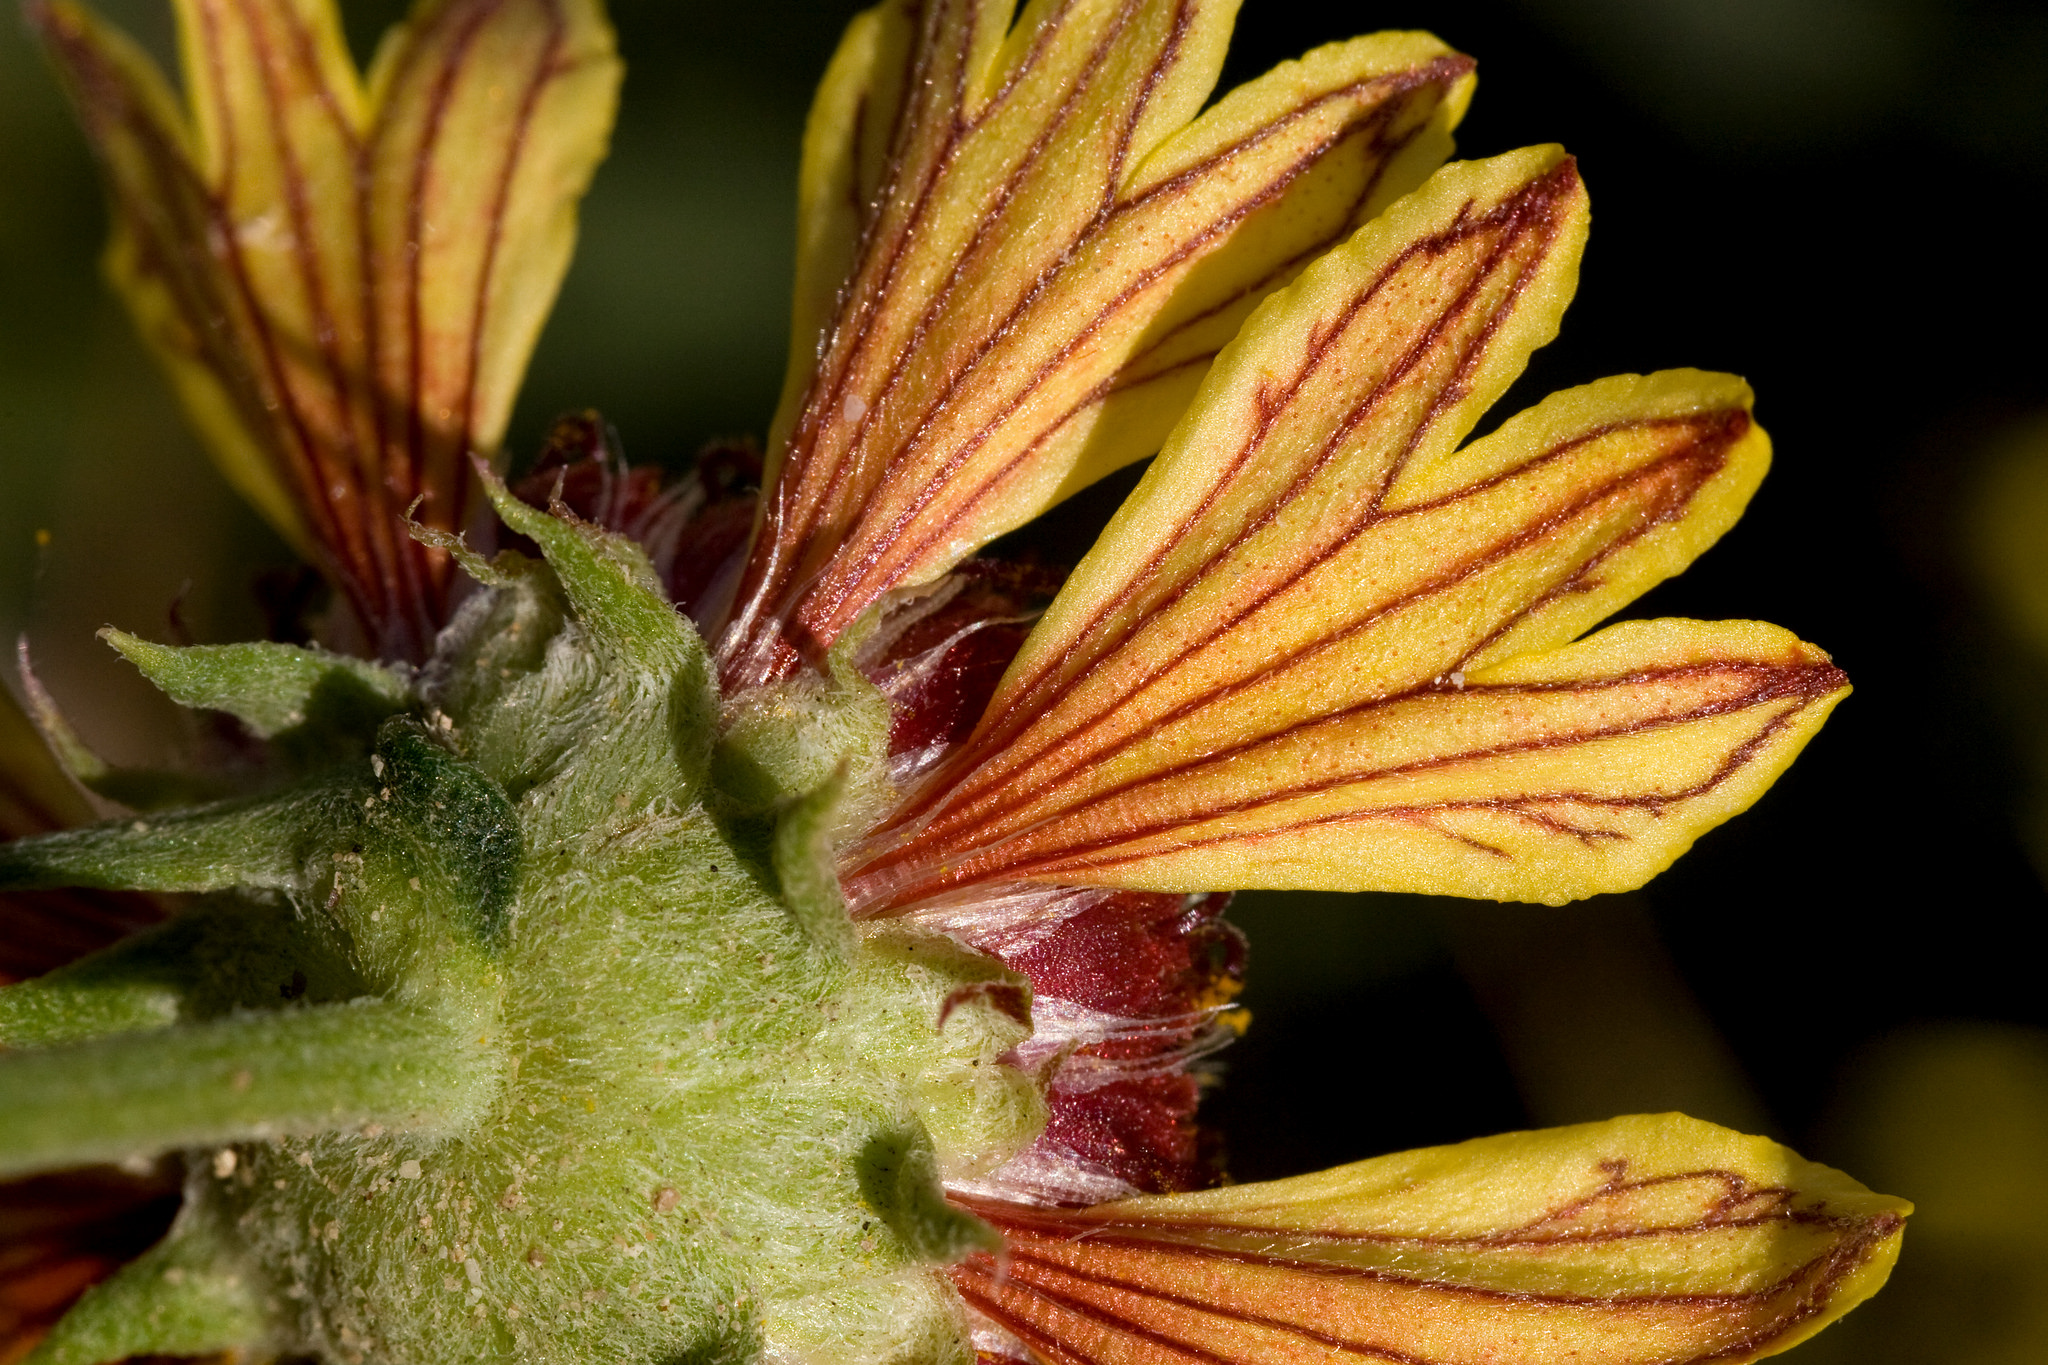 One example of a petal coloration: yellow tridentate petals with red veins